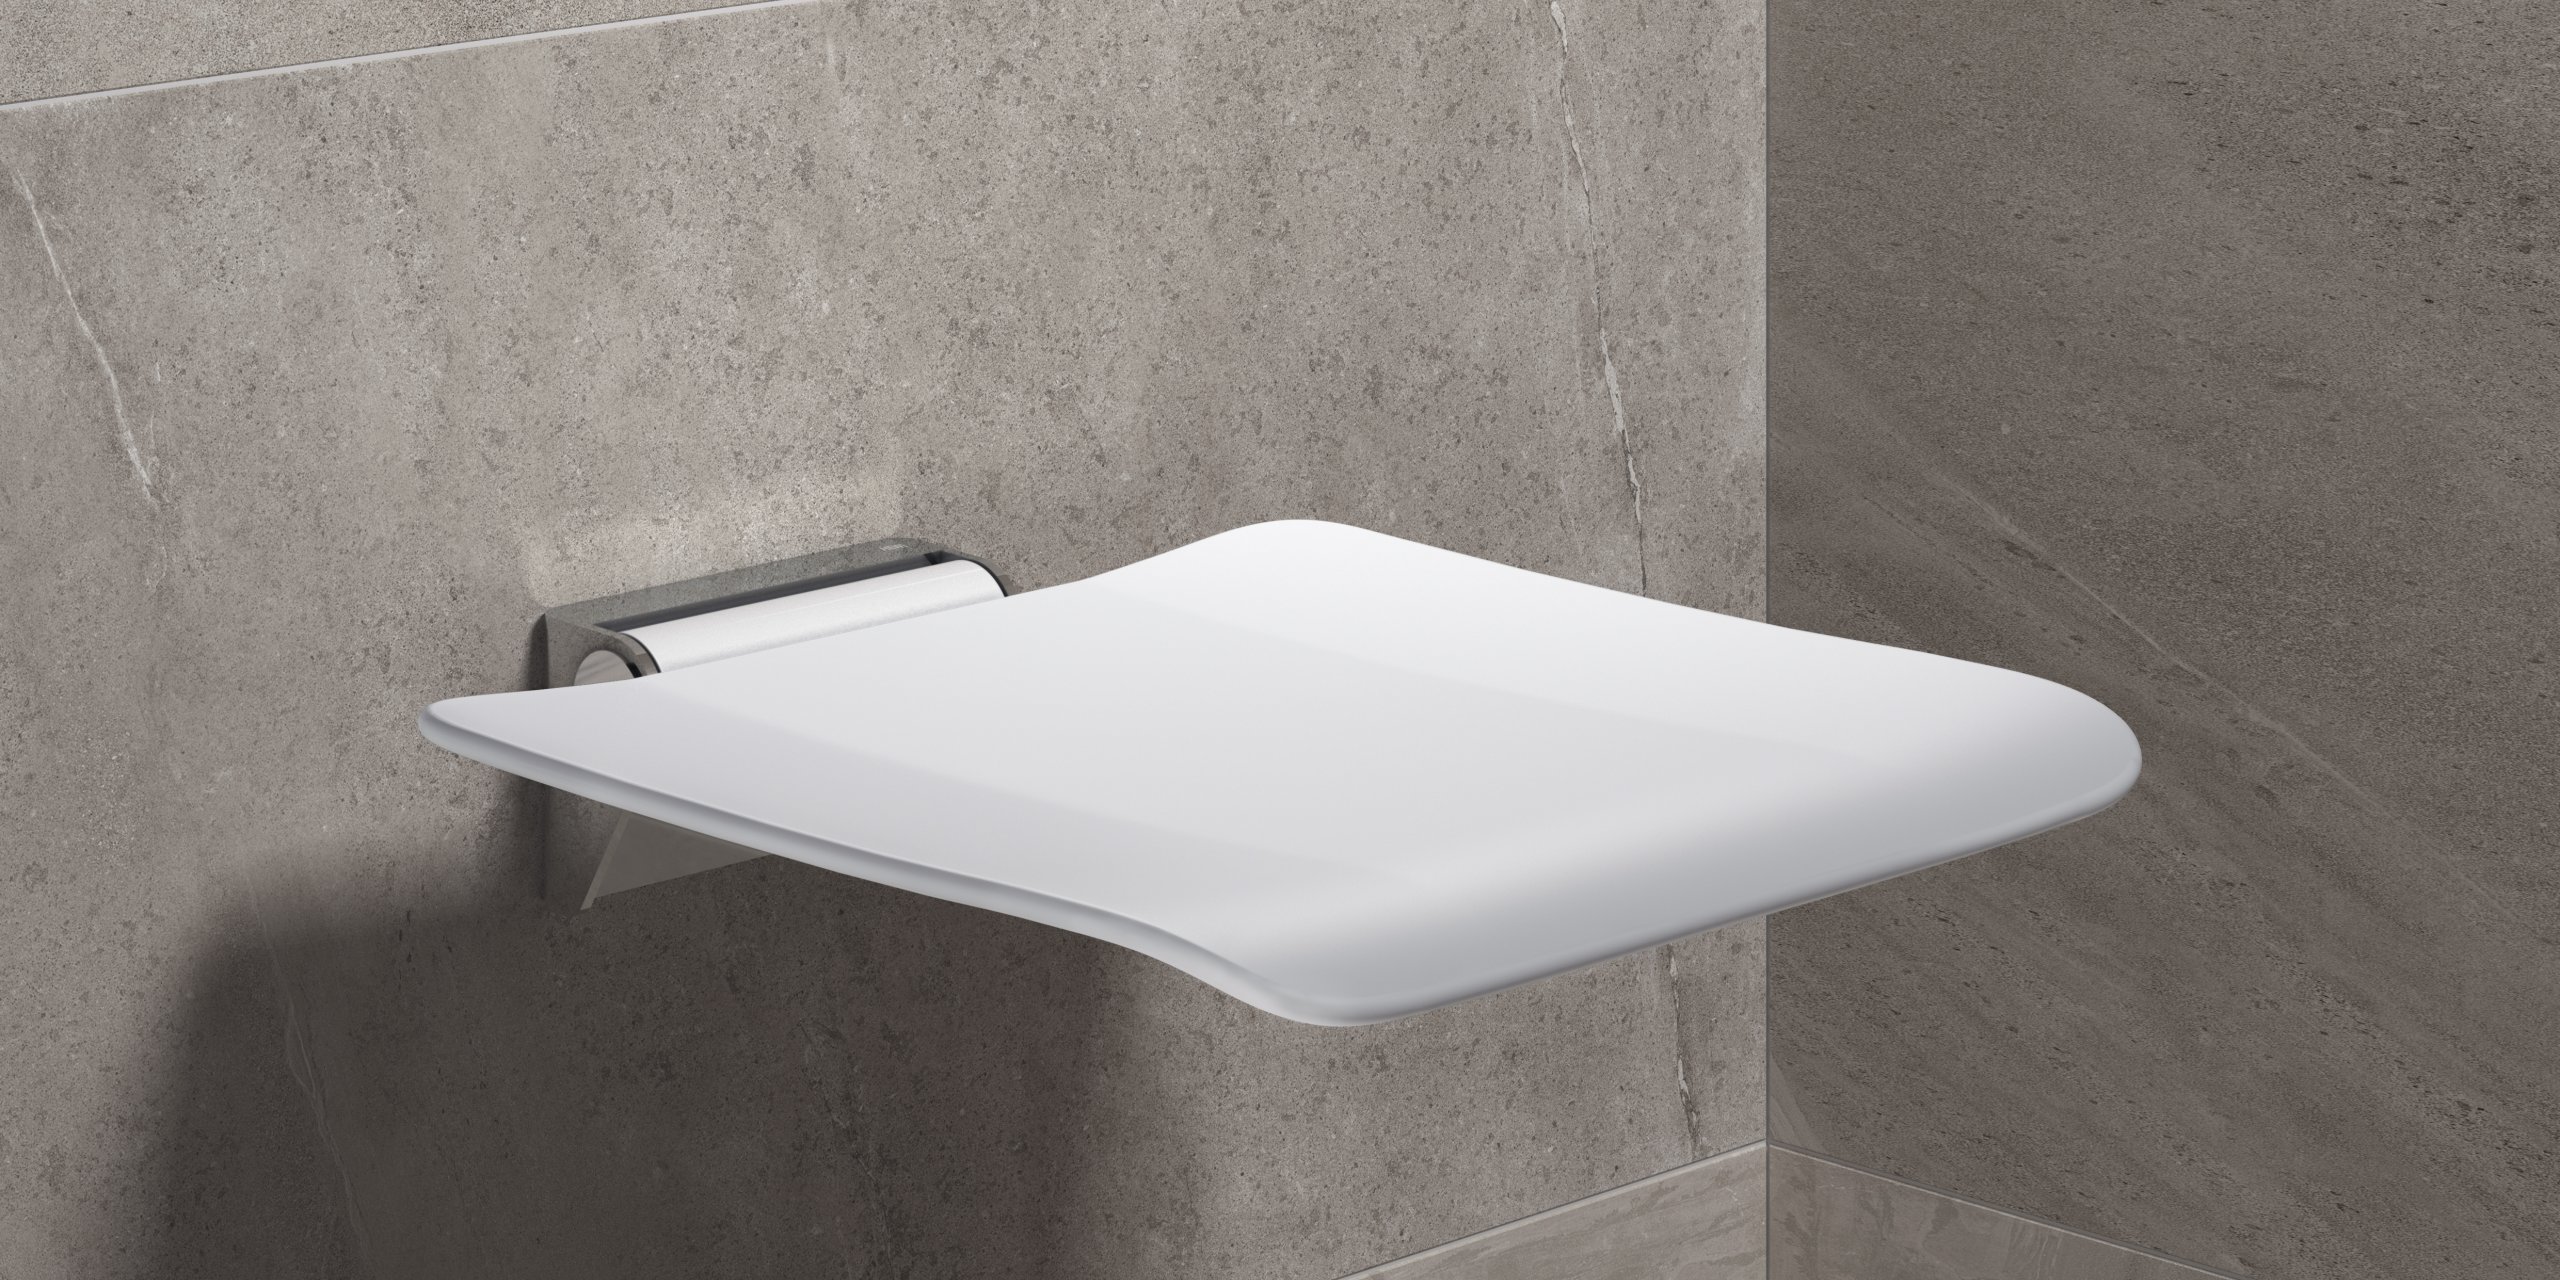 Folding seat for the shower in the colour white